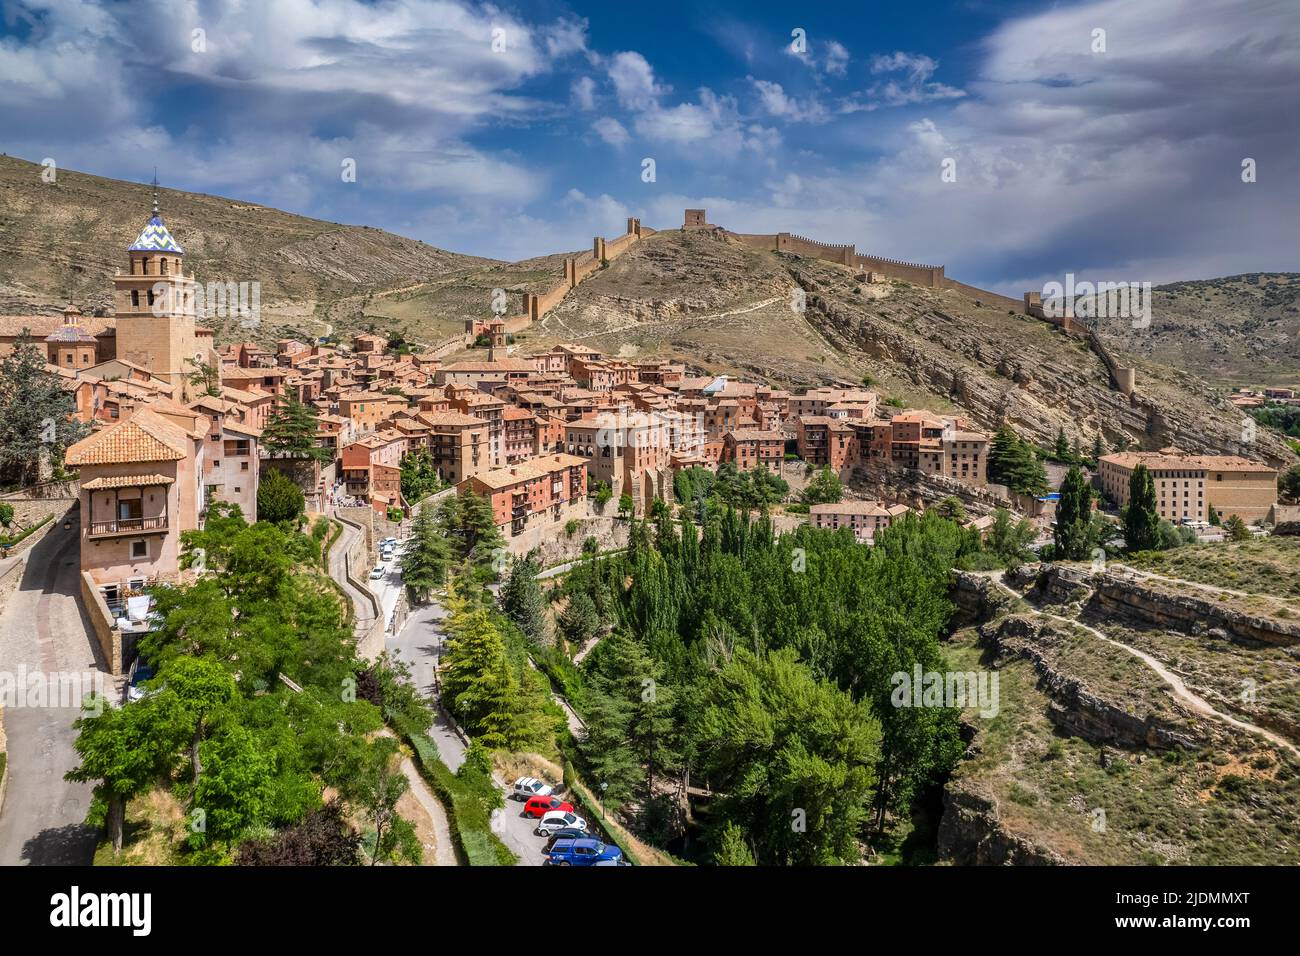 Aerial view of Albarracin with its ancient walls, Aragon, Spain Stock Photo